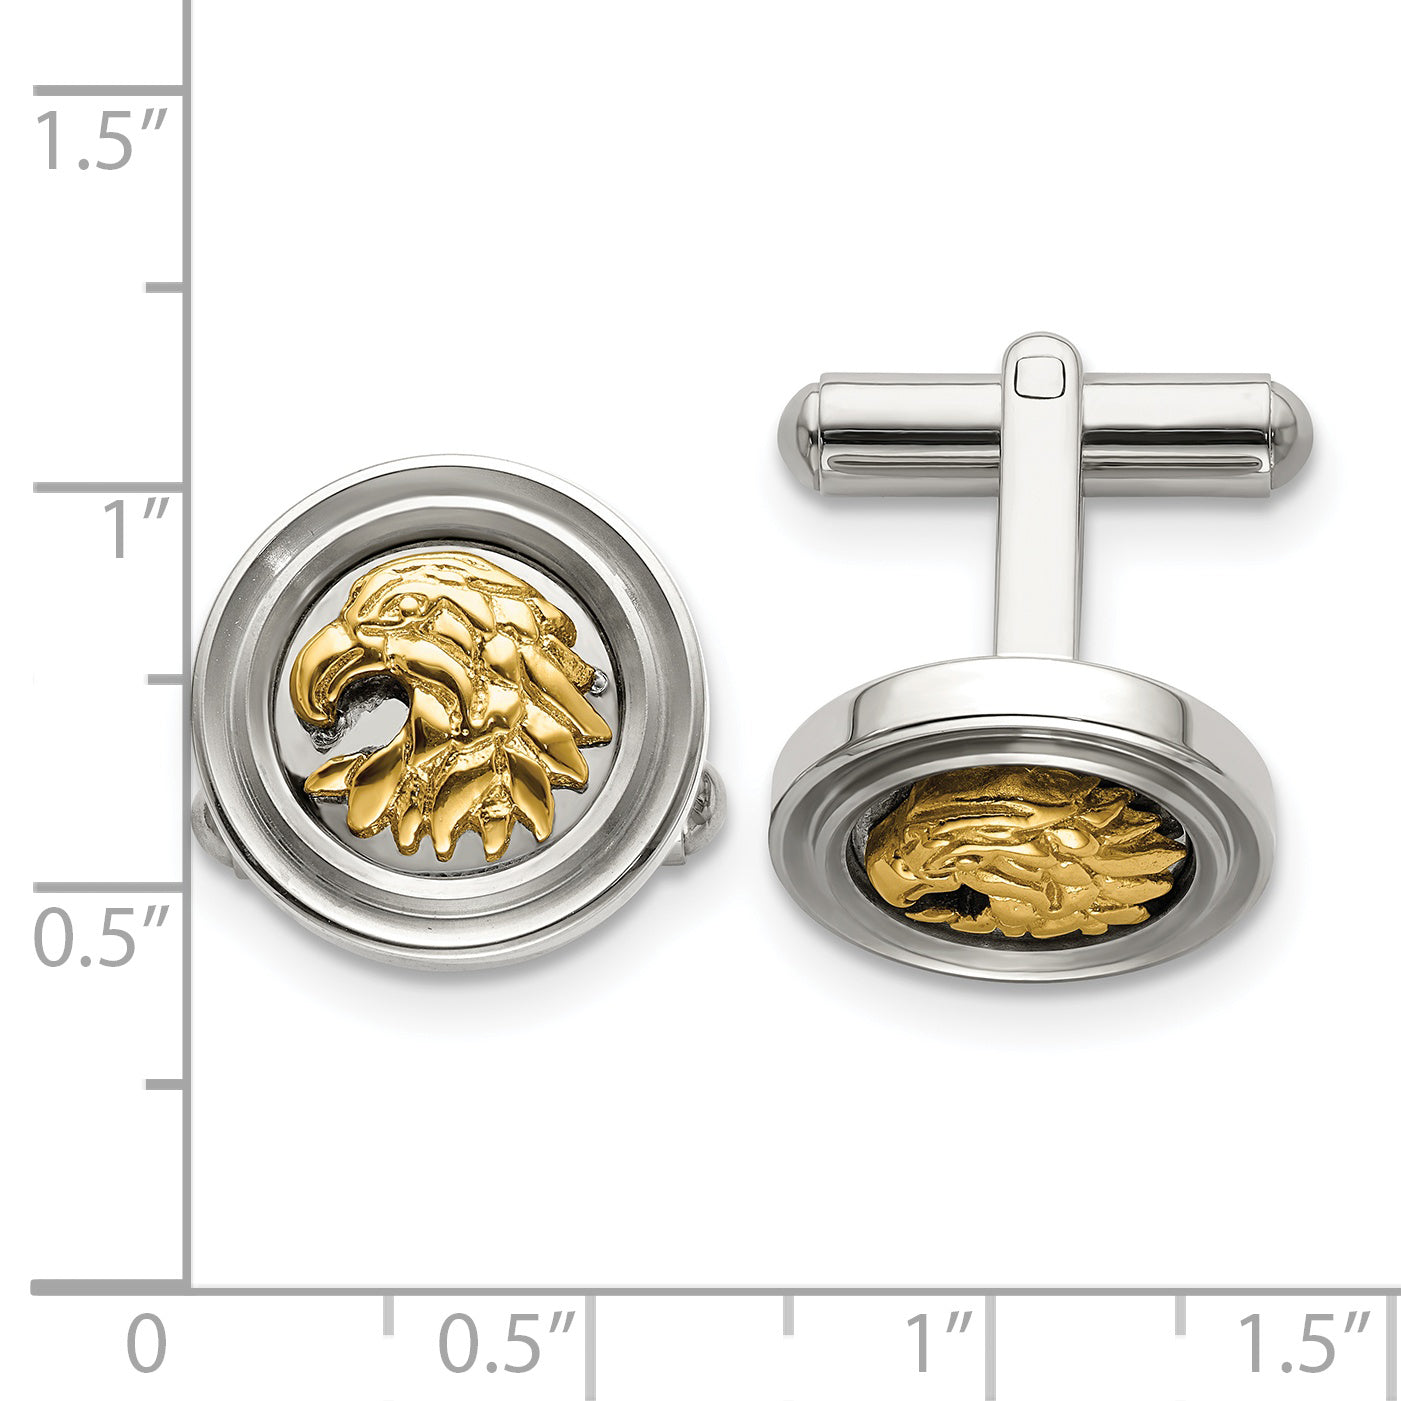 Chisel Stainless Steel Polished Yellow IP-plated Eagle Cufflinks